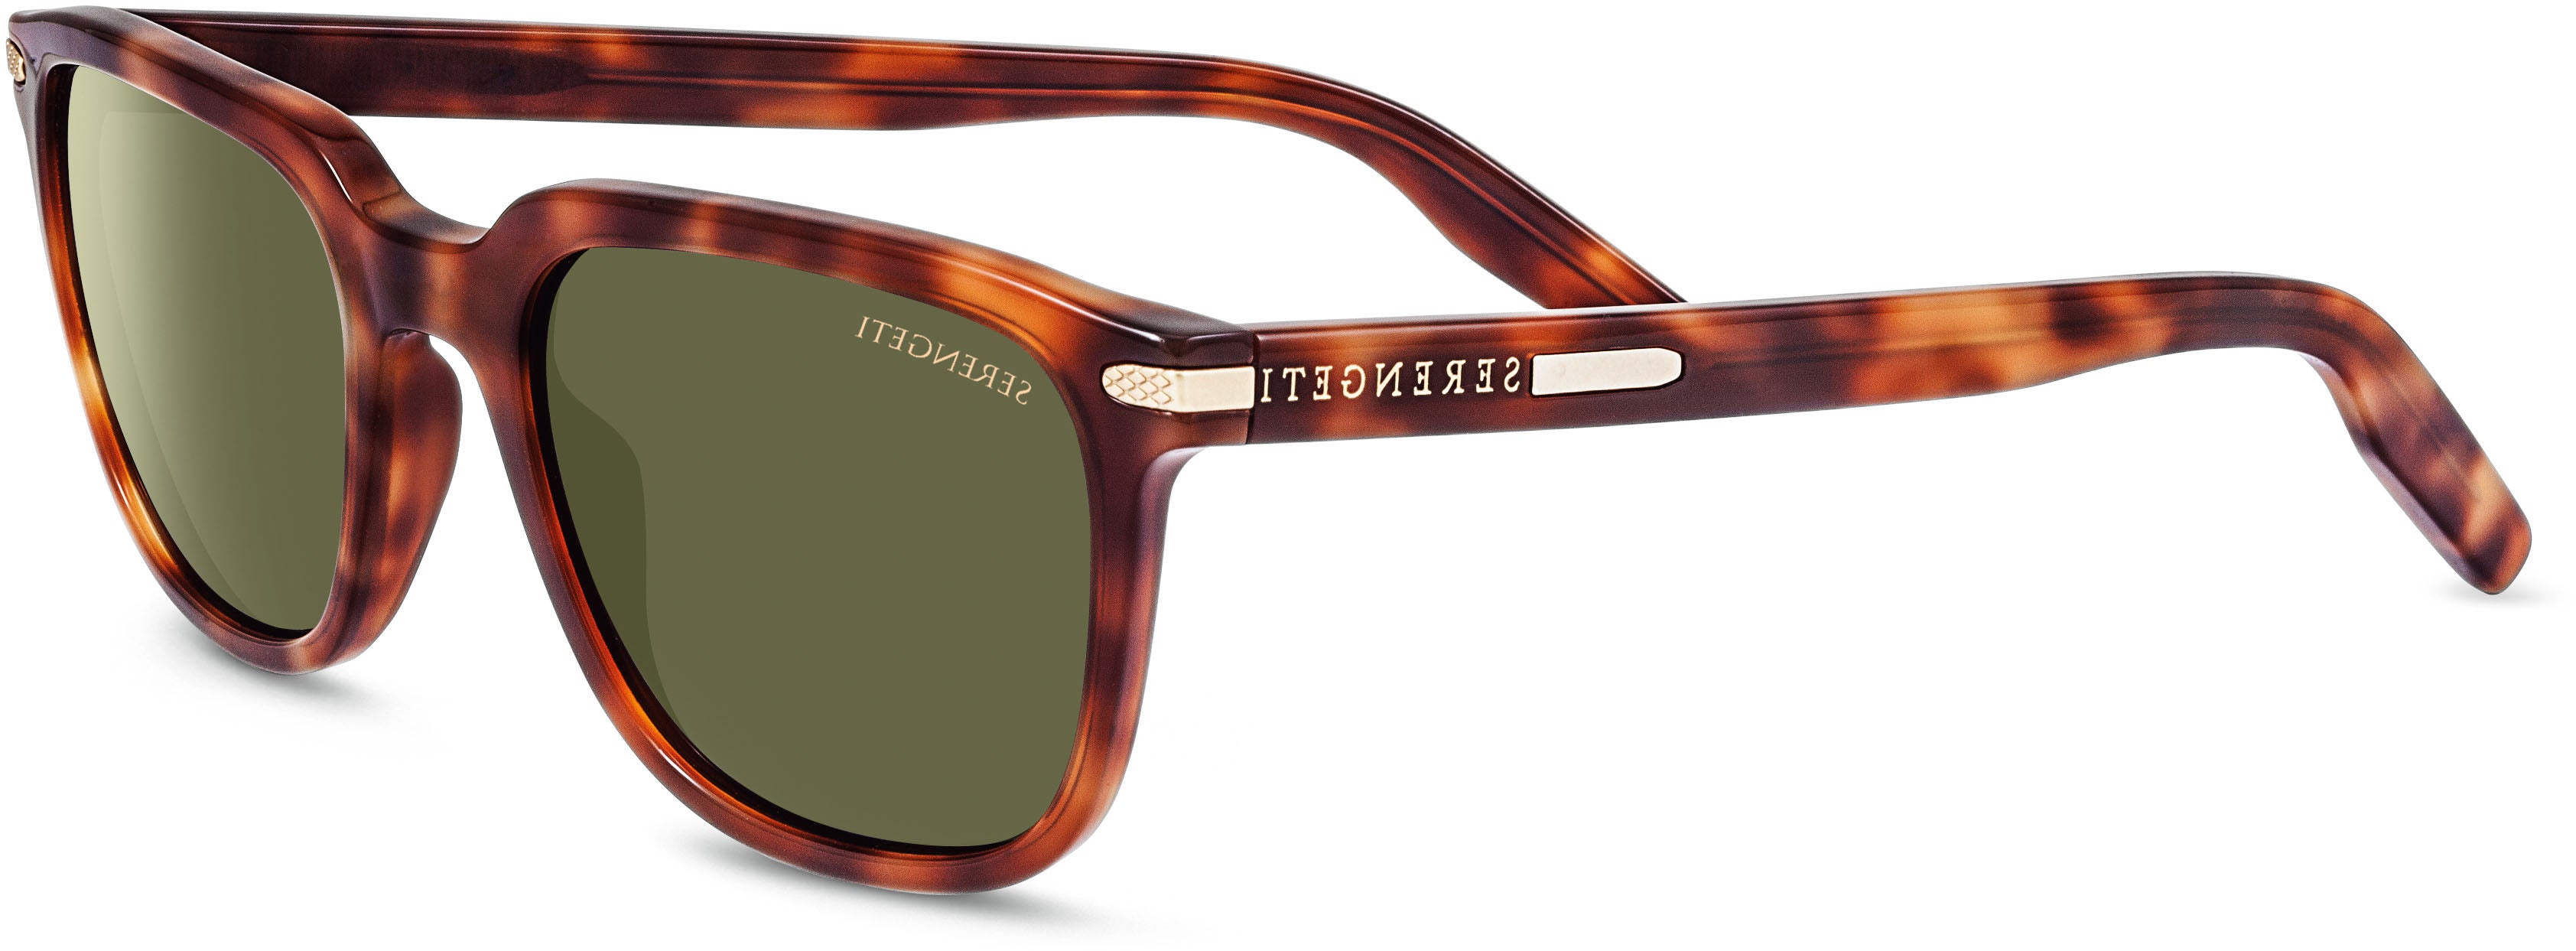 Color_Butter Rum Tortoise - Polarized 555nm ( 8473 )